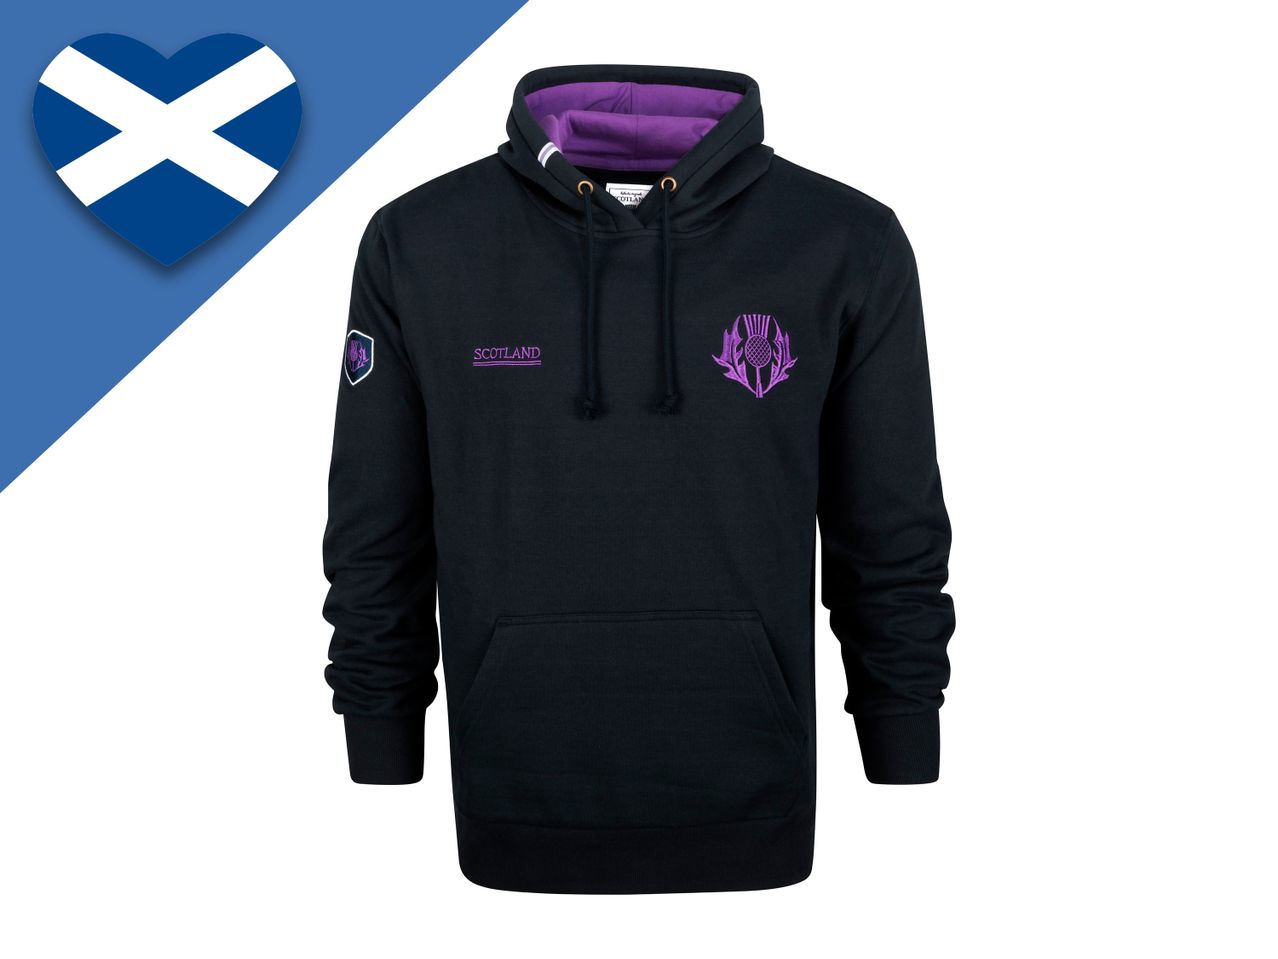 Go to full screen view: Adults’ Scotland Rugby Hoodie - Image 1